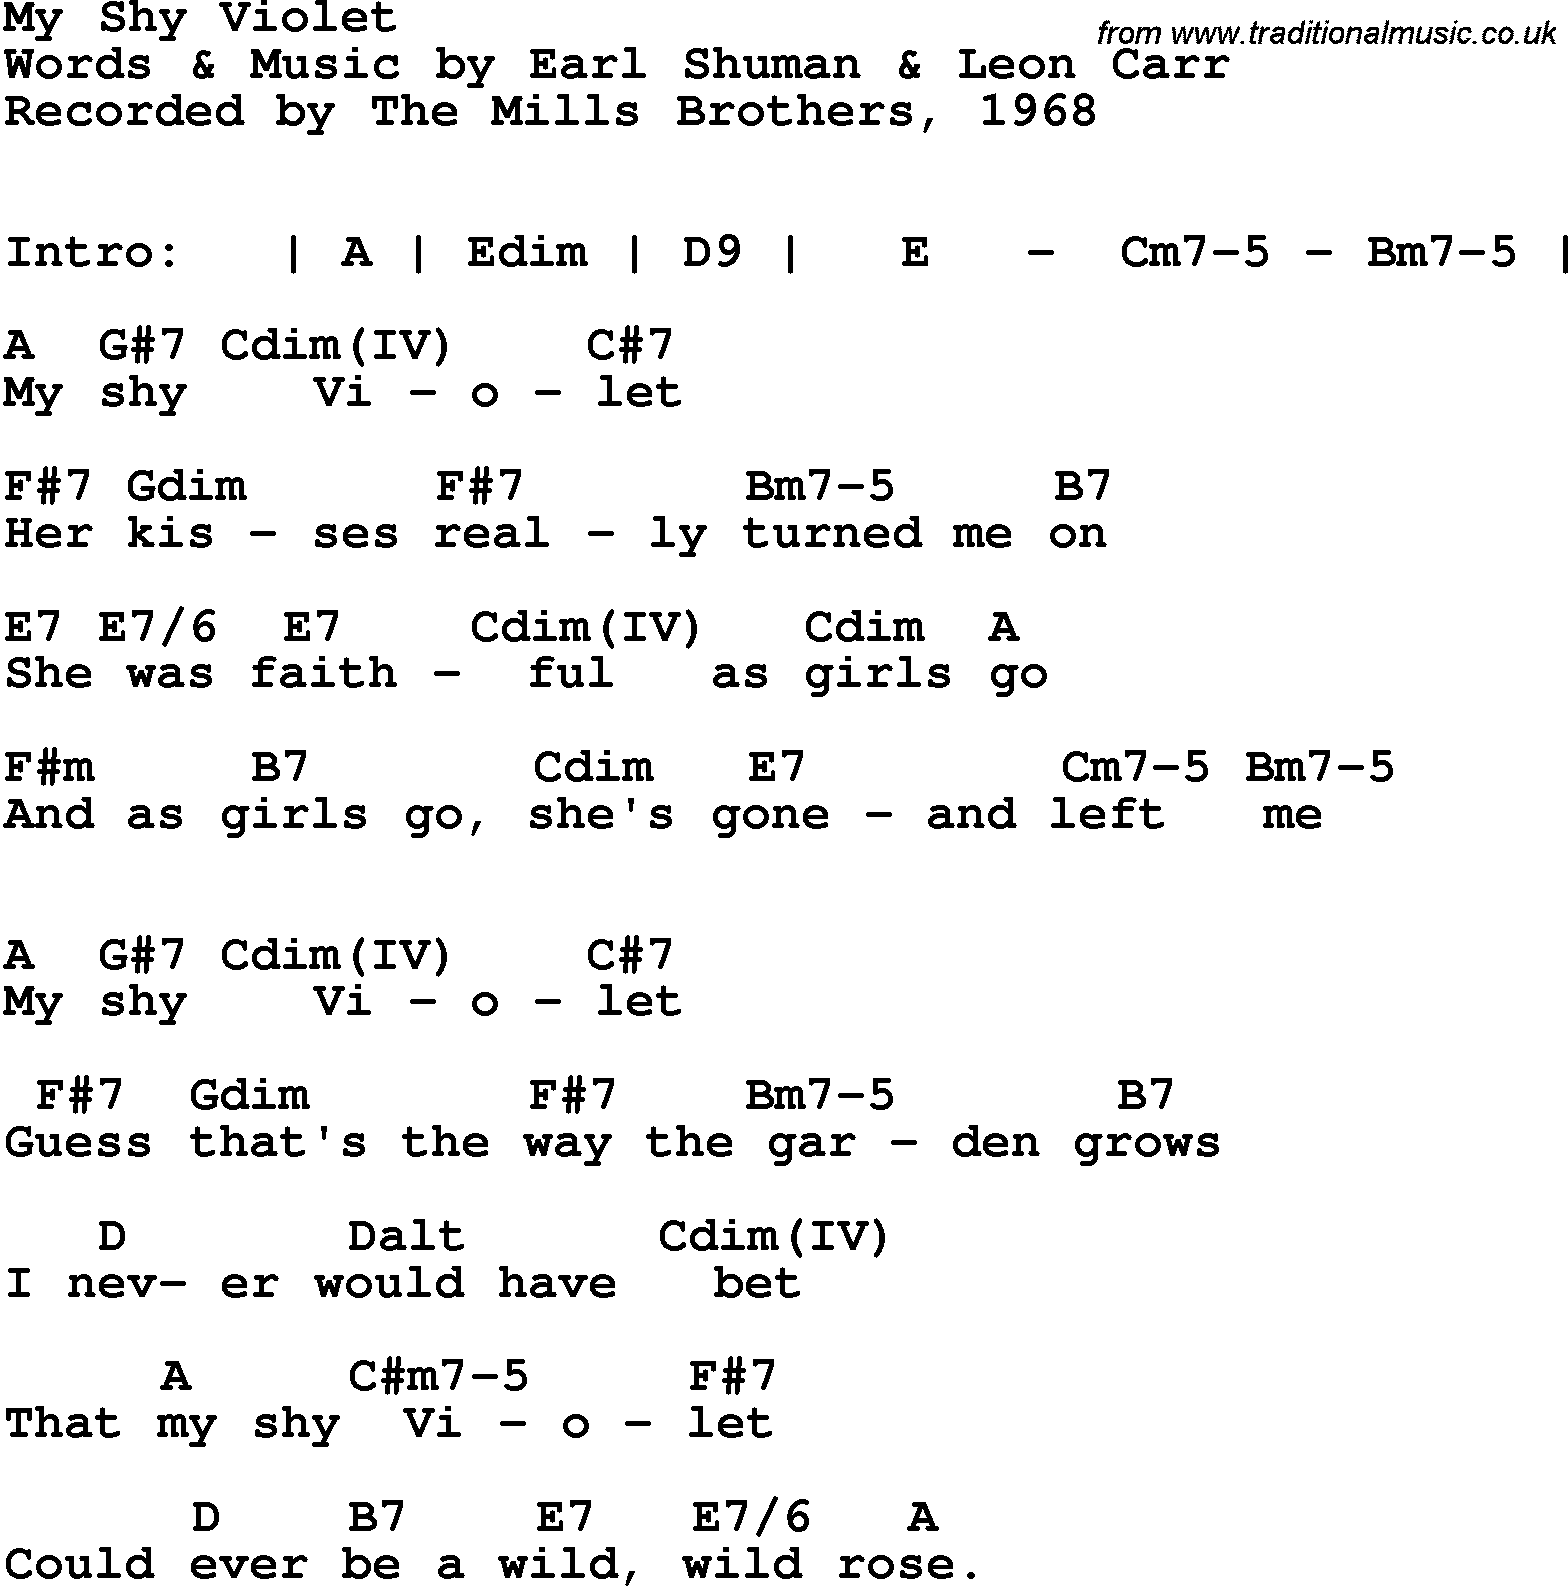 Song Lyrics with guitar chords for My Shy Violet - The Mills Brothers, 1968